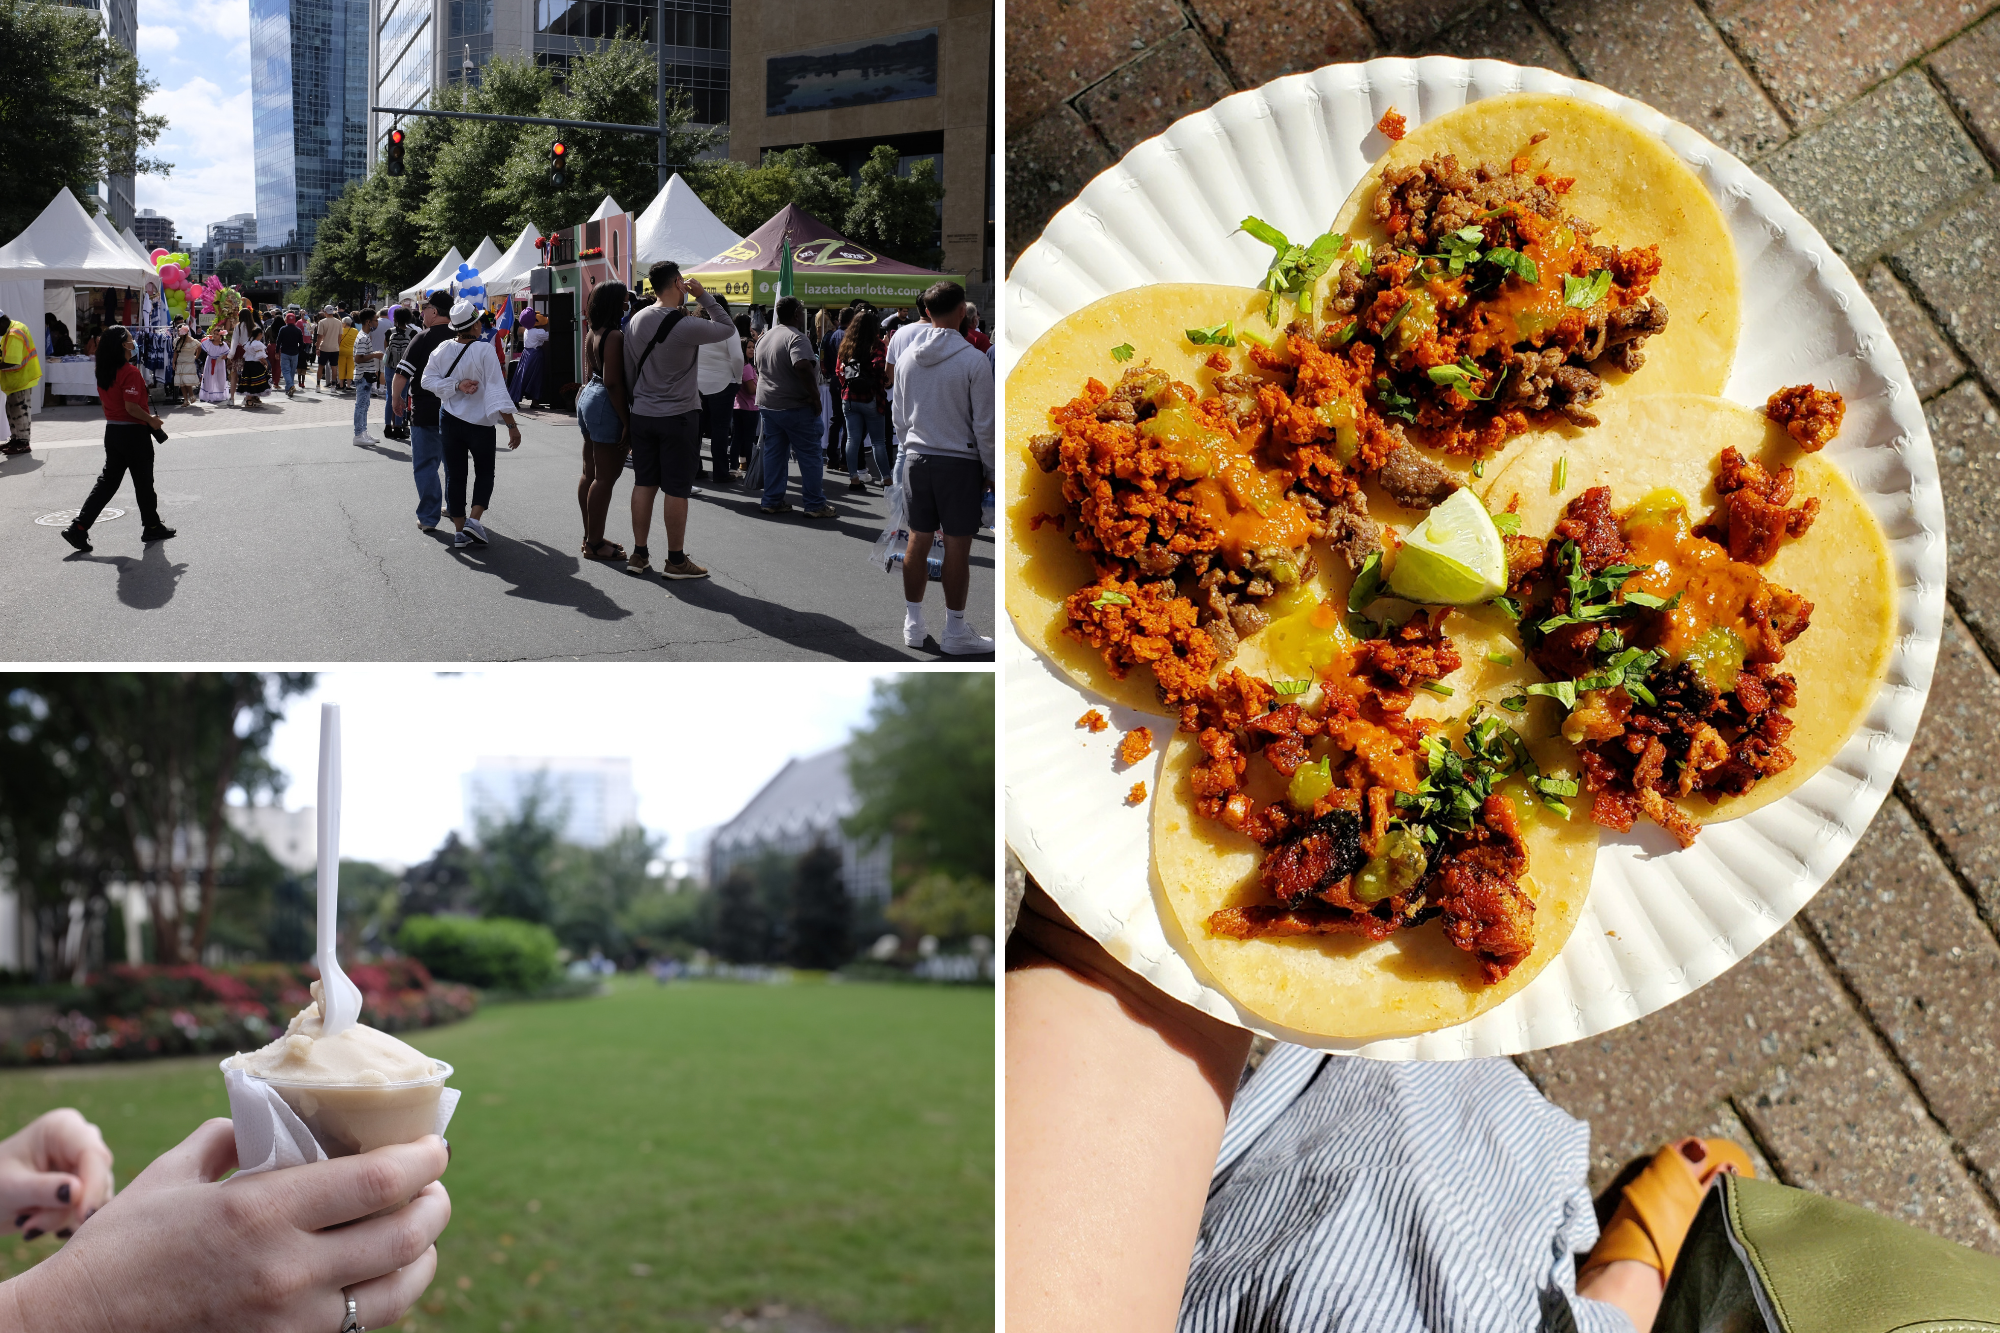 Grid image of festival-goers and tents lining the street; a plate of tacos; and a tamarind frozen dessert in a cup with a spoon